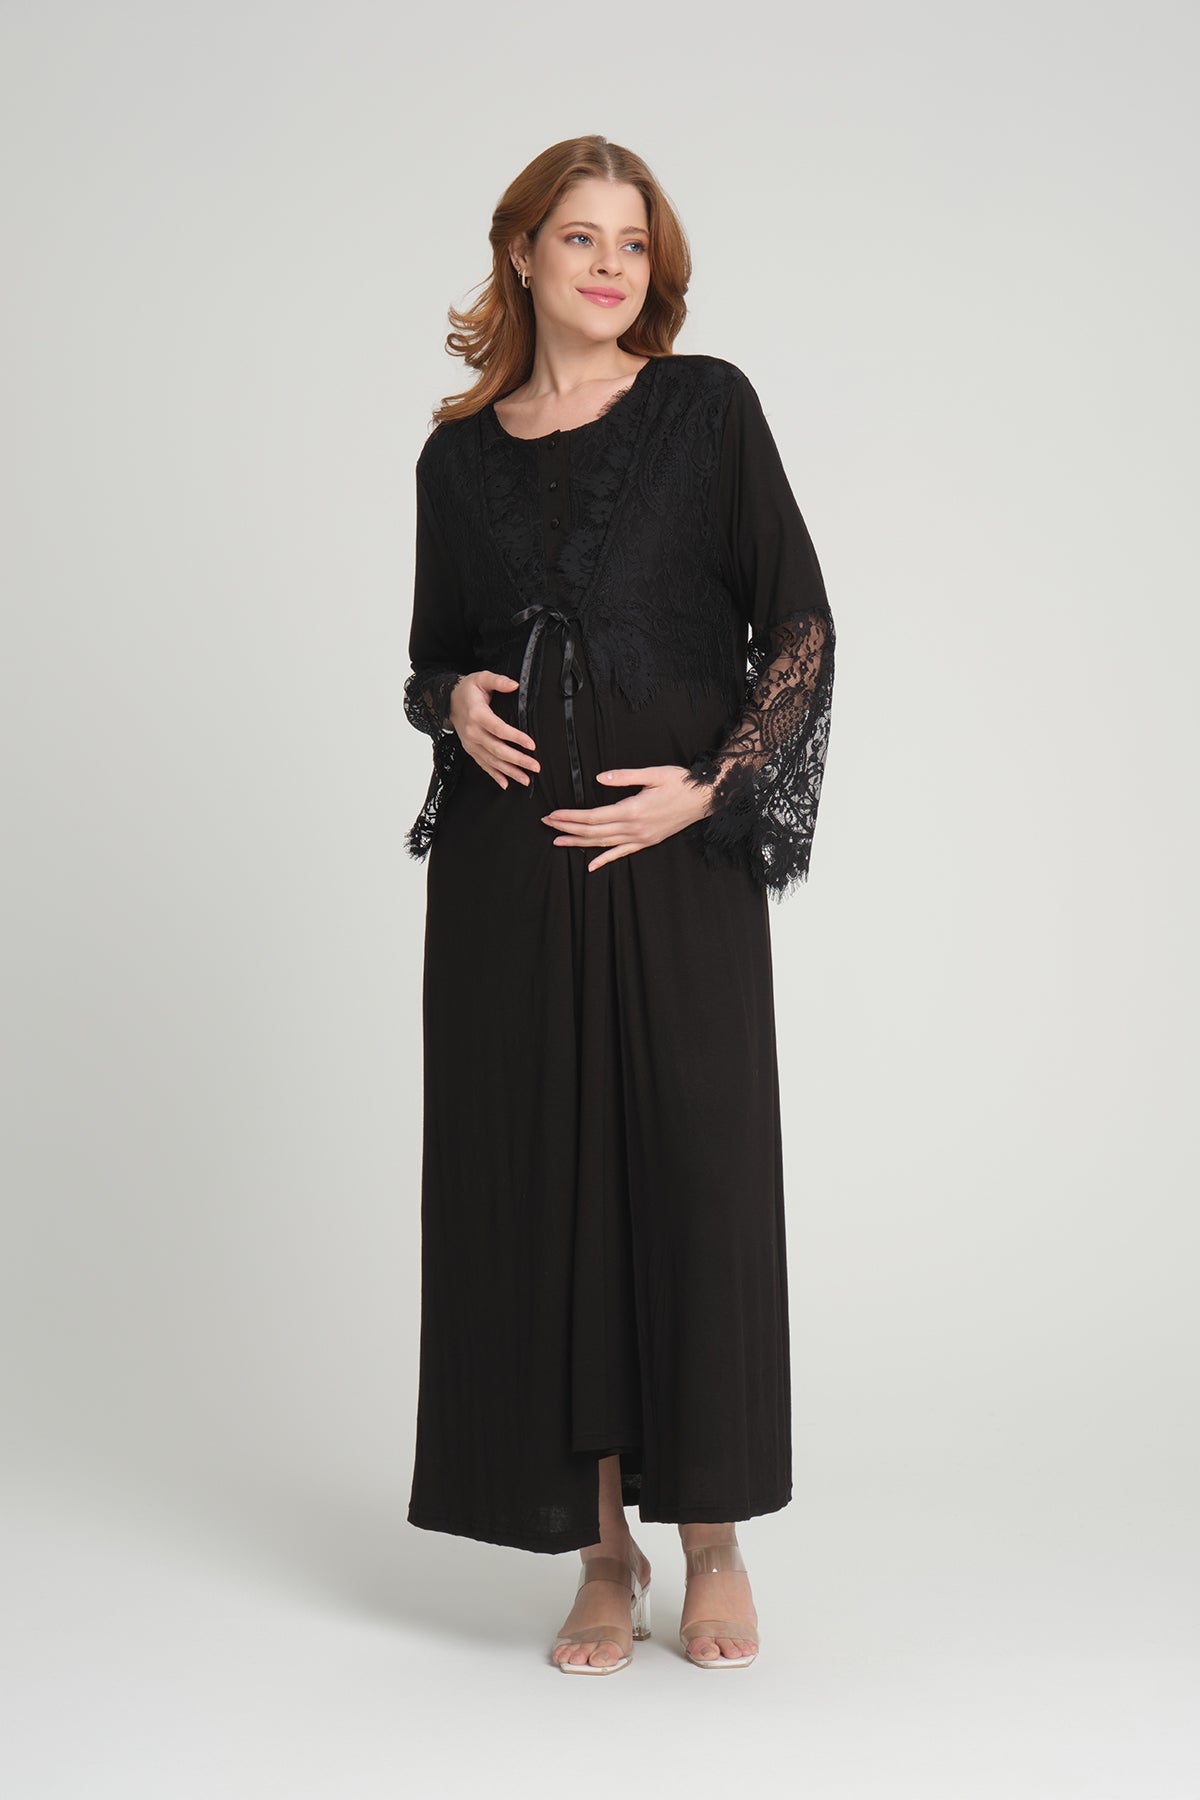 Shopymommy 202 Maternity & Nursing Nightgown With Lace Sleeve Robe Black